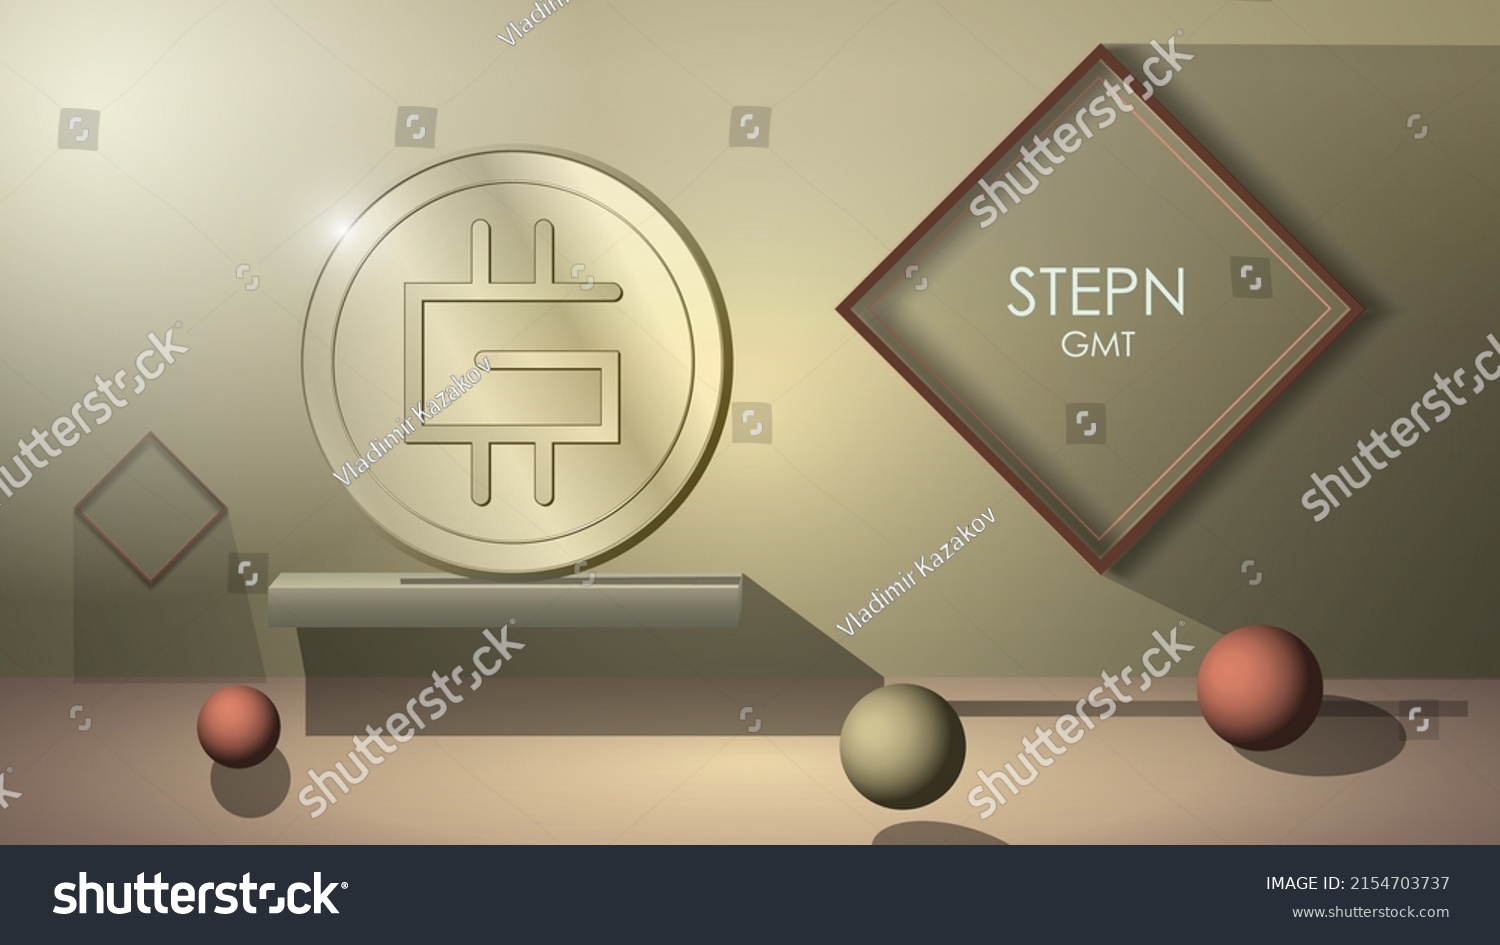 SVG of Stepn GMT coin in front view with balls on floor and frames on wall in 3d style. Website header or banner with digital currency coin icon. Vector illustration. svg